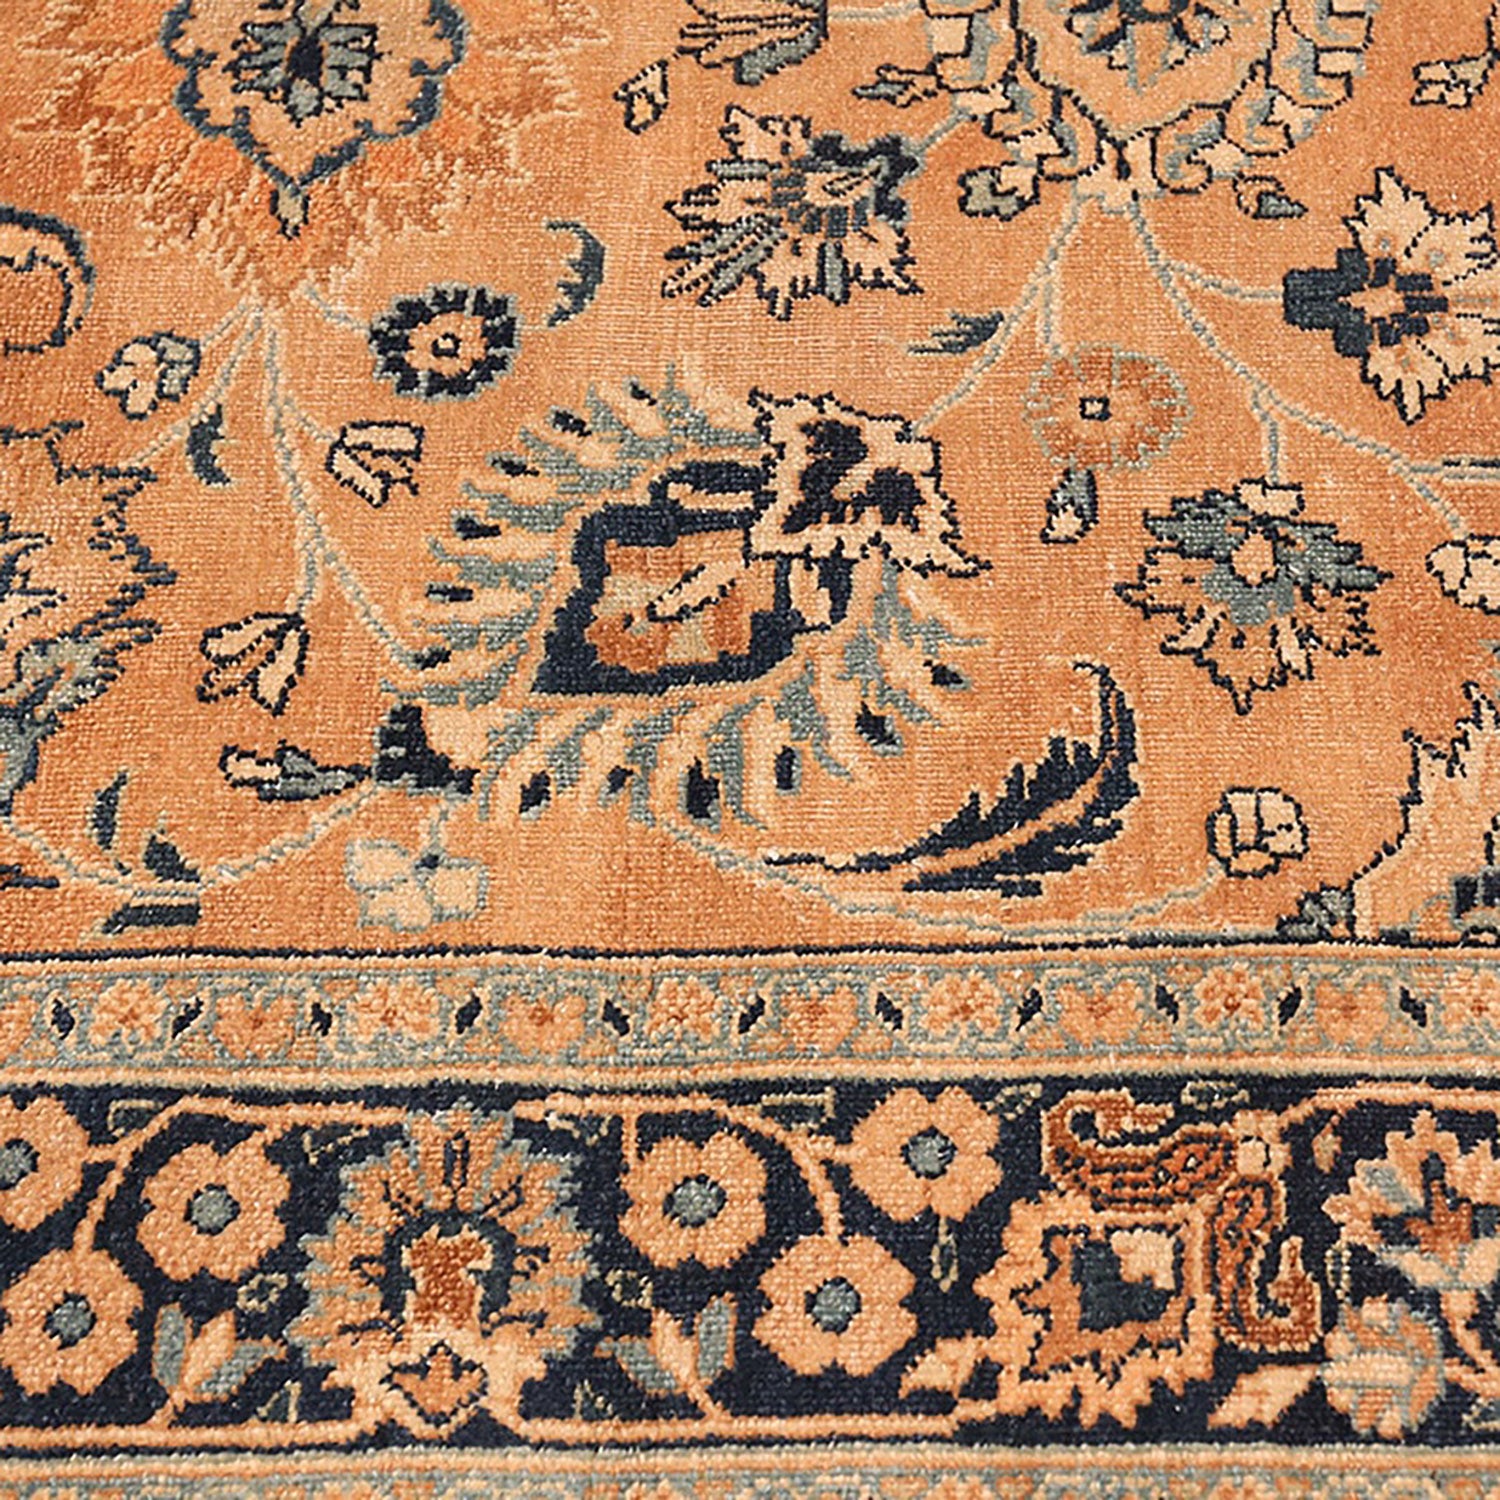 Close-up of a handwoven Oriental rug with intricate floral motifs.